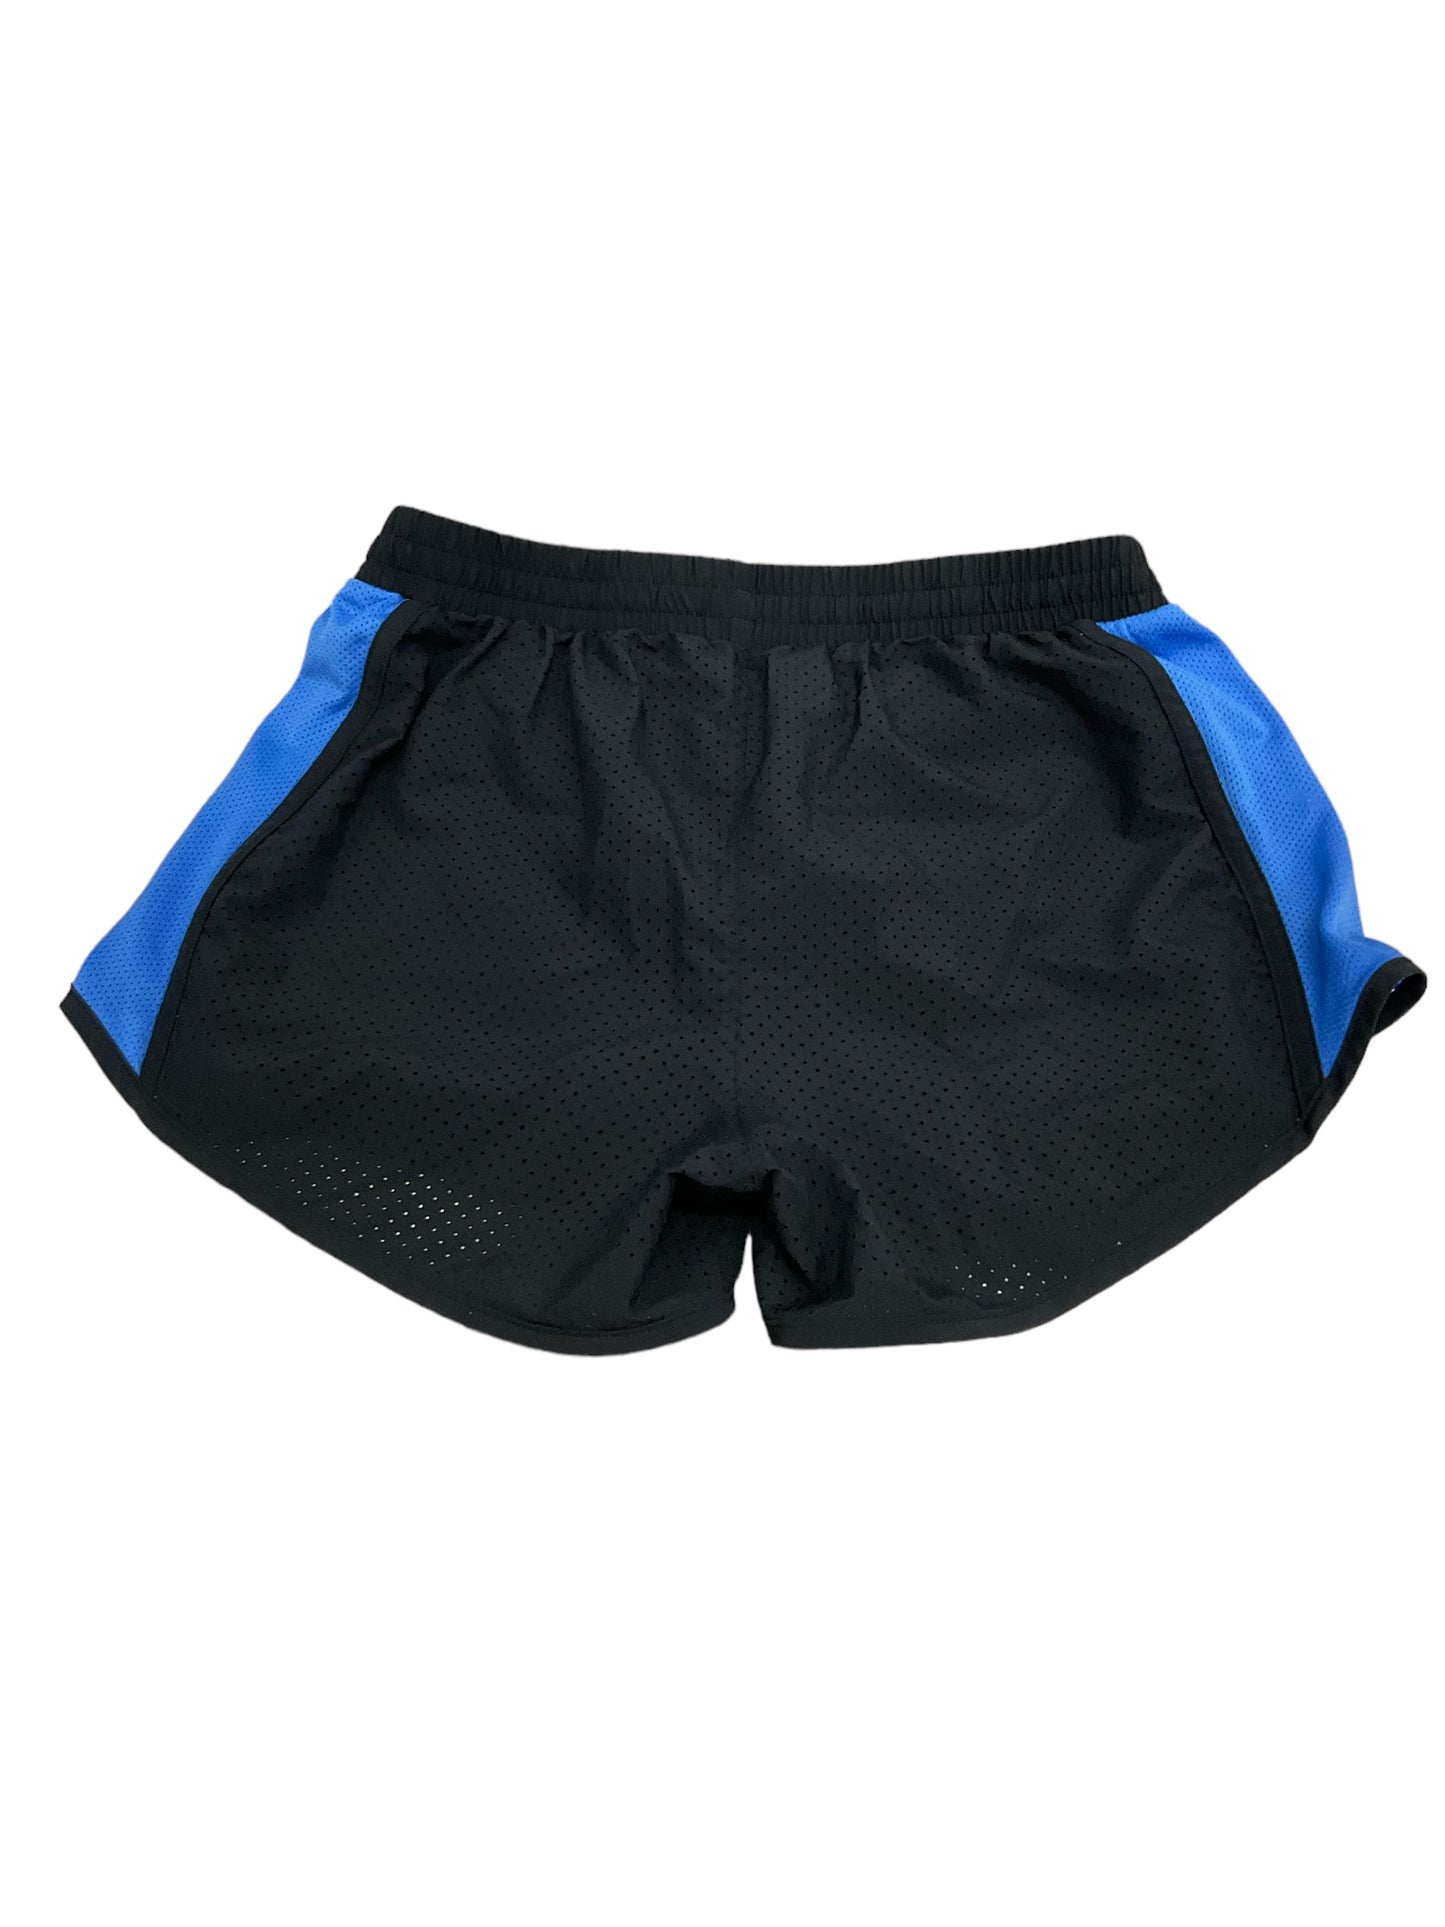 Athletic Shorts By Under Armour  Size: S